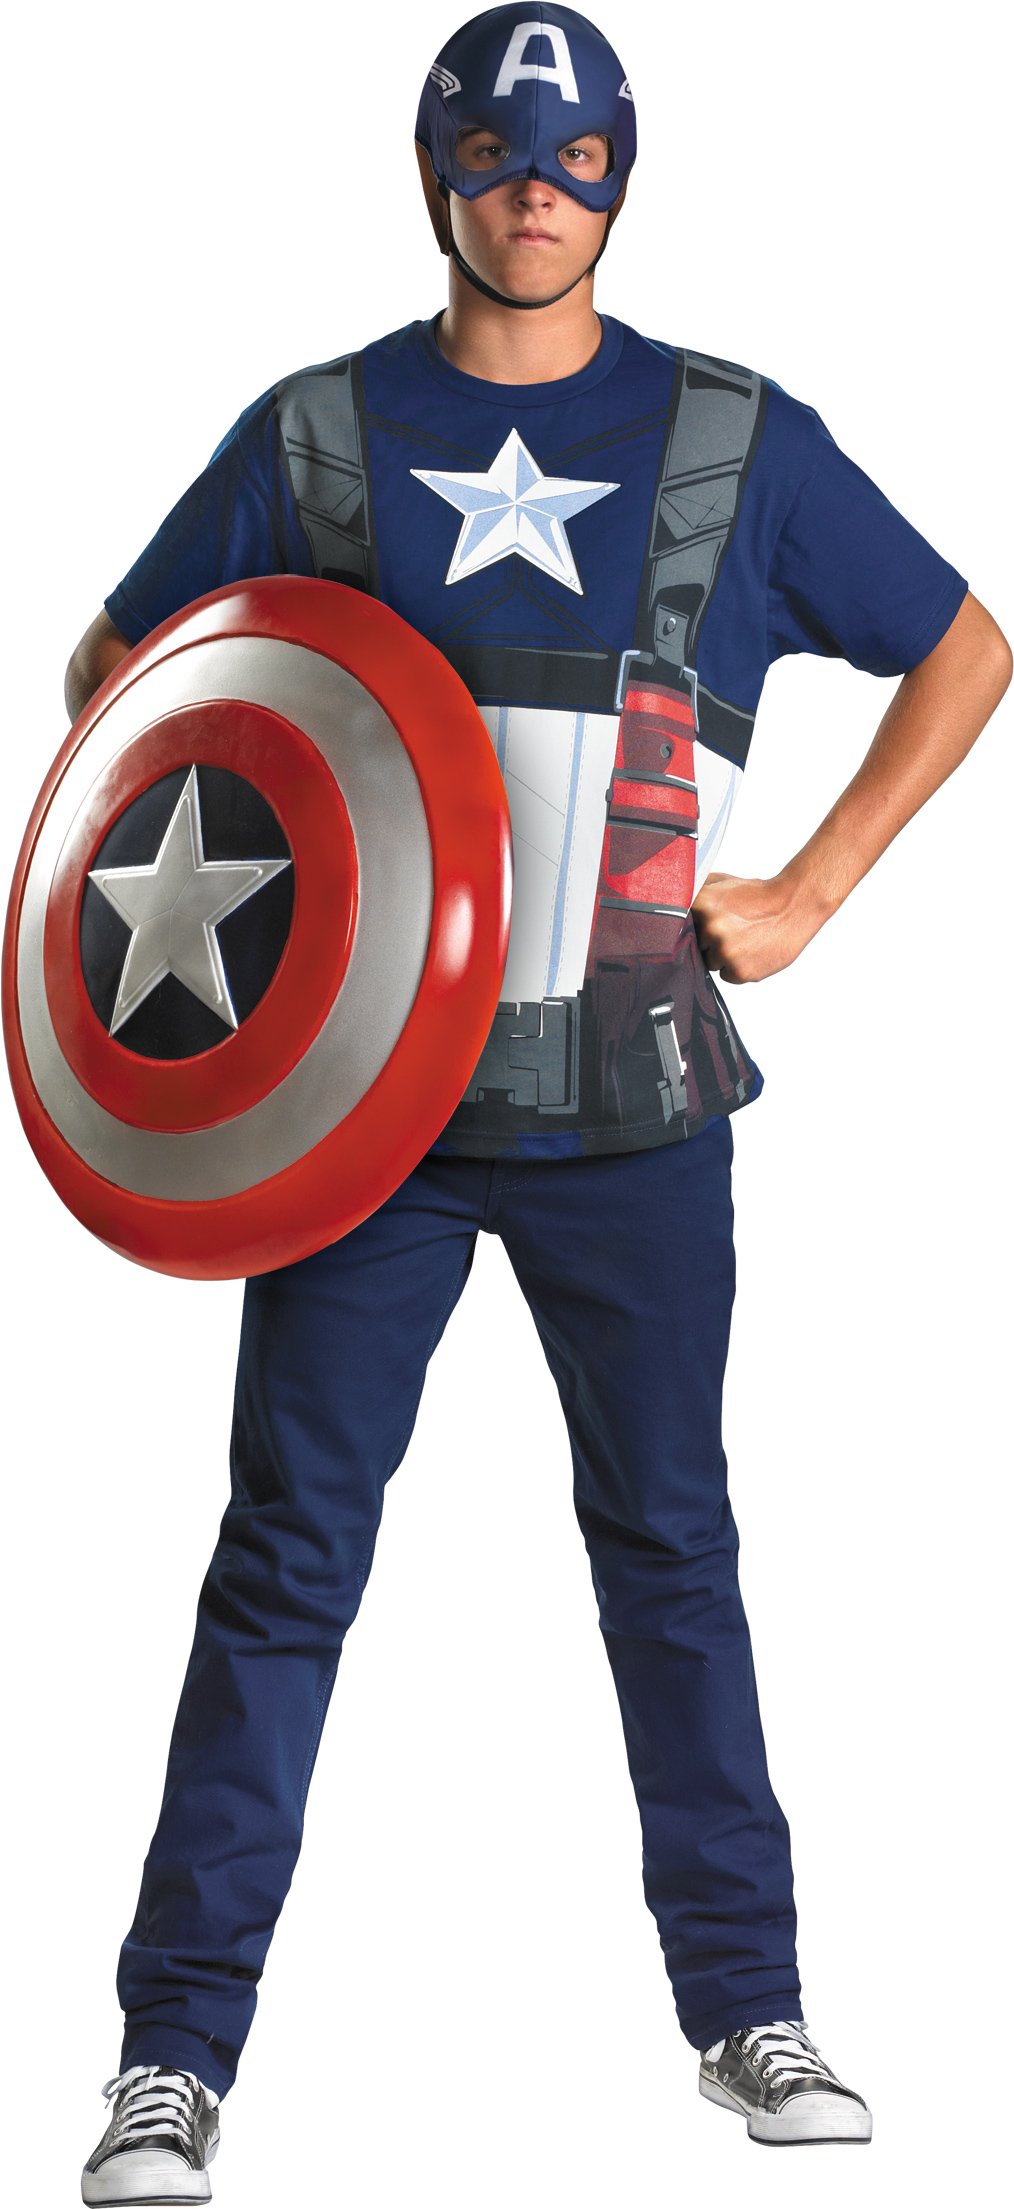 Captain America T-Shirt And Mask Adult Costume Set - Click Image to Close